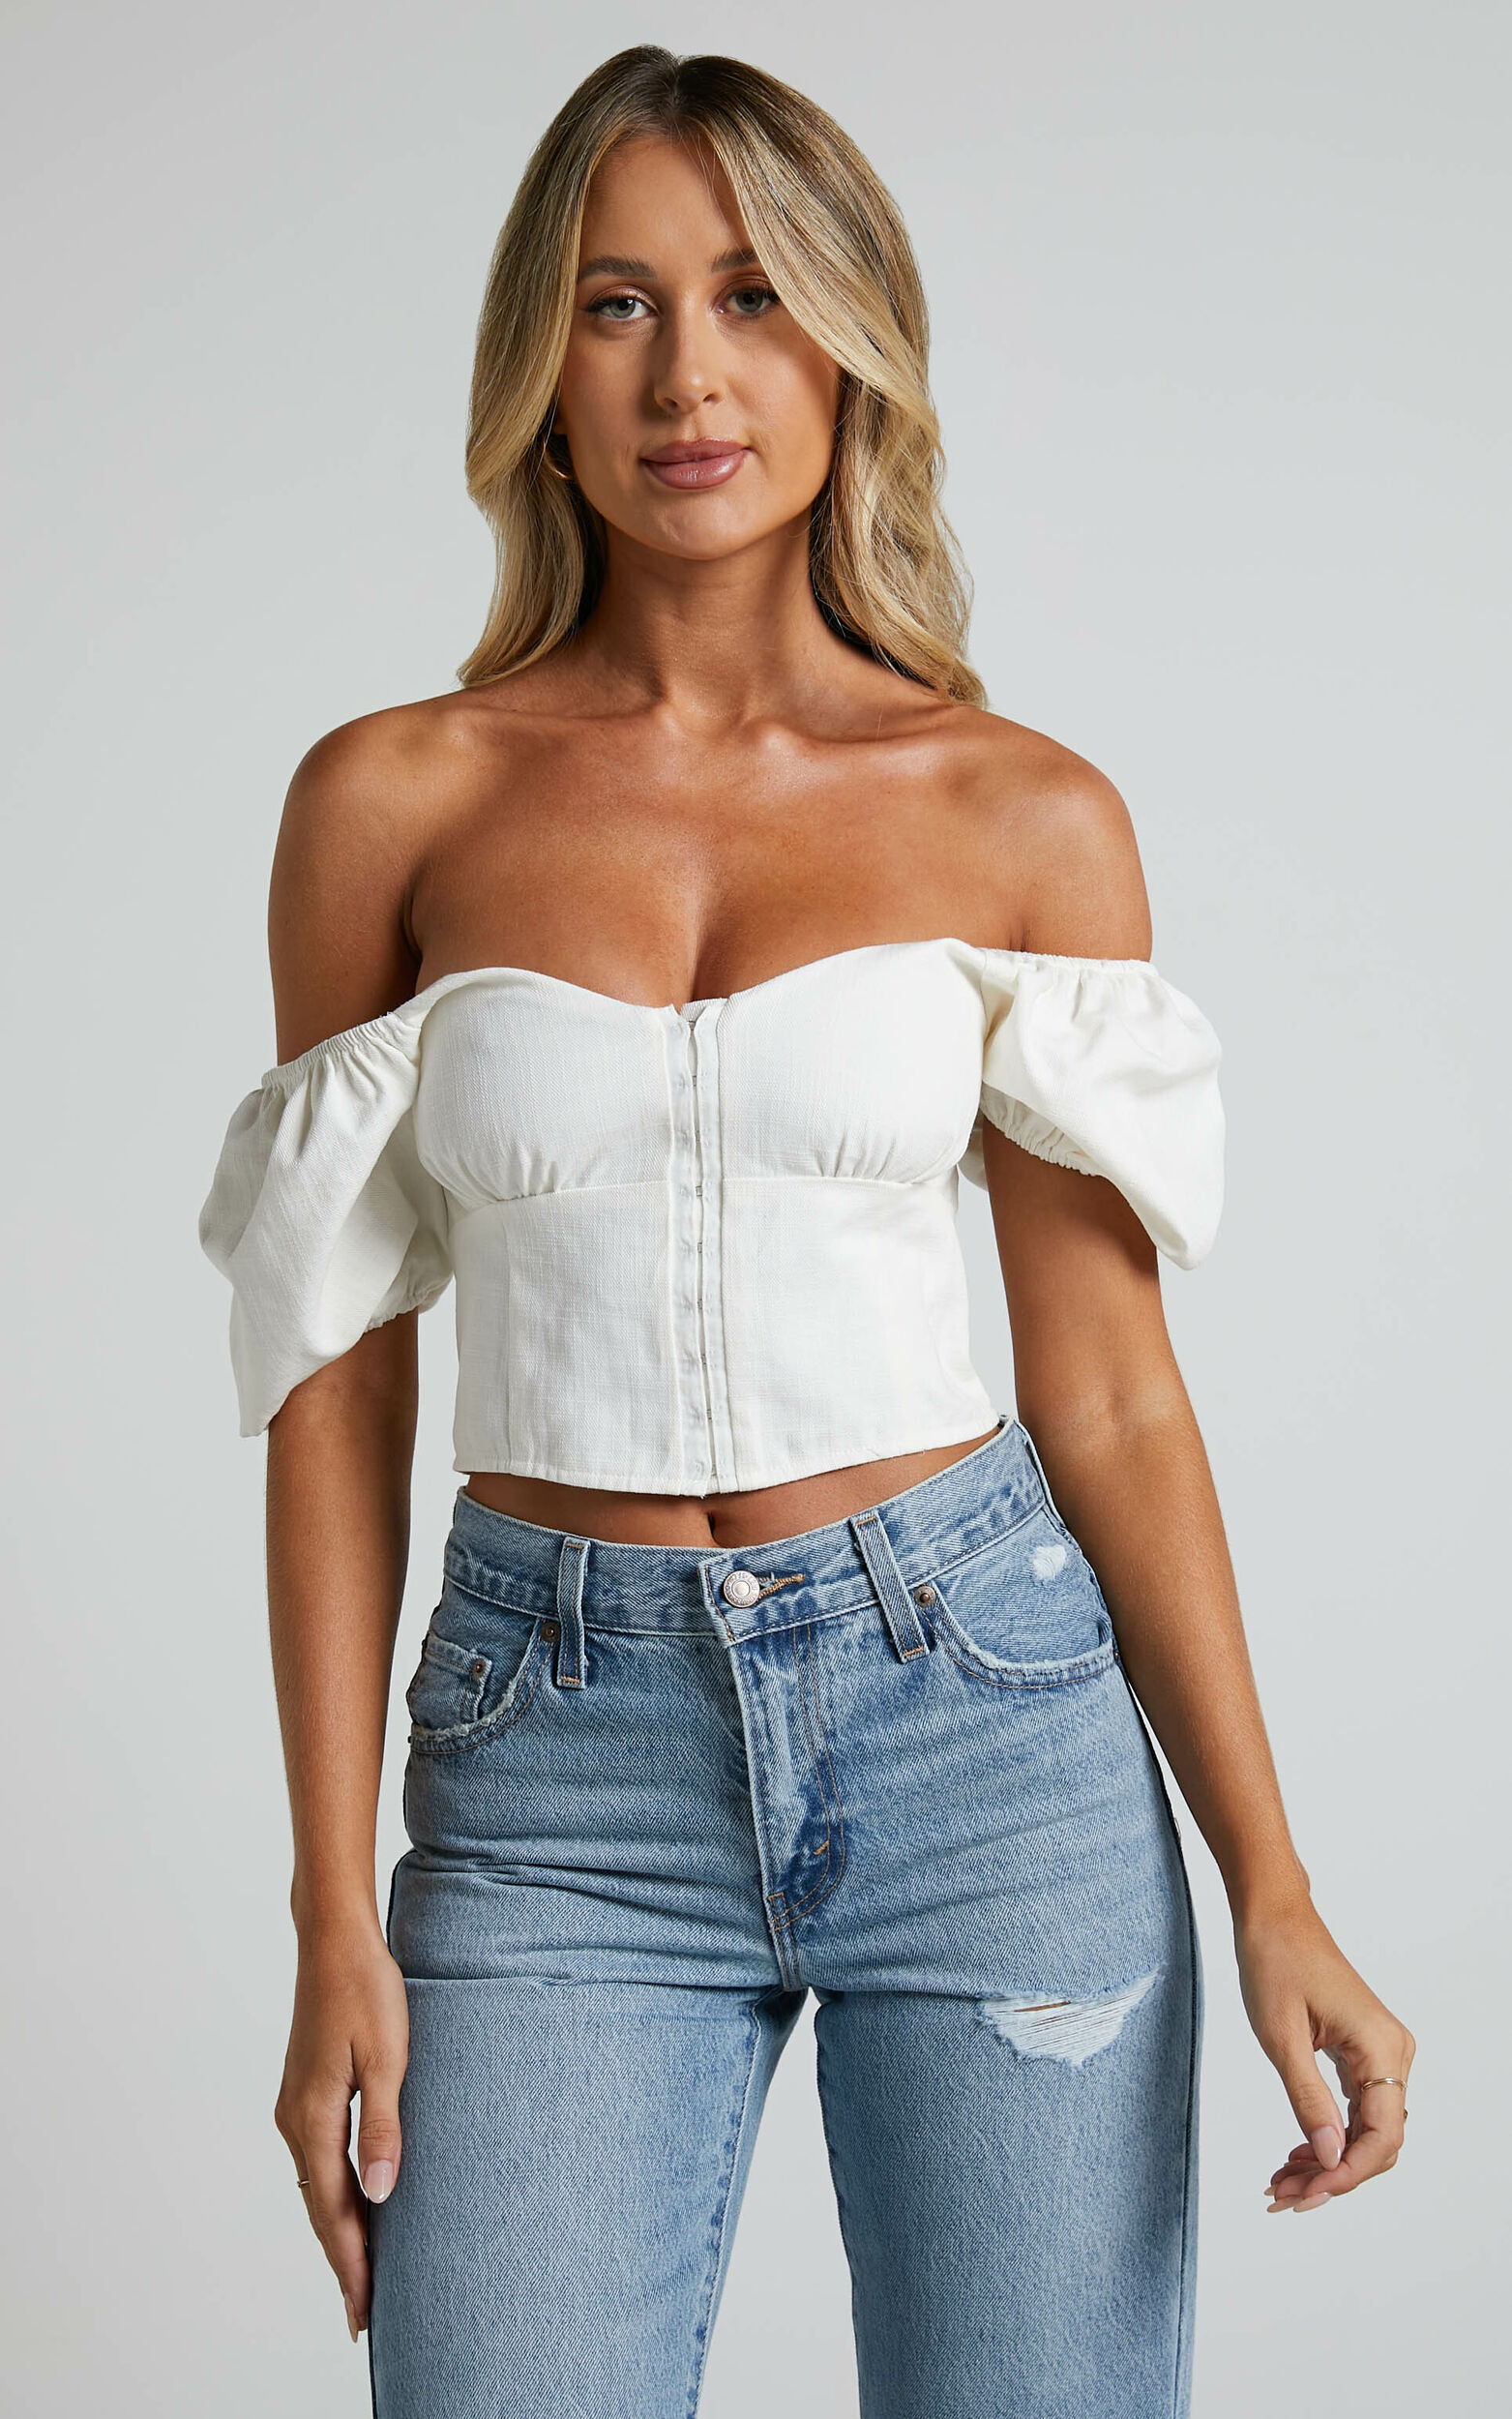 https://images.showpo.com/dw/image/v2/BDPQ_PRD/on/demandware.static/-/Sites-sp-master-catalog/default/dw0ef5ca78/images/braxia-puff-sleeve-off-shoulder-corset-top-ST23050011/Braxia_Puff_Sleeve_Off_Shoulder_Corset_Top_in_White_8.jpg?sw=1563&sh=2500